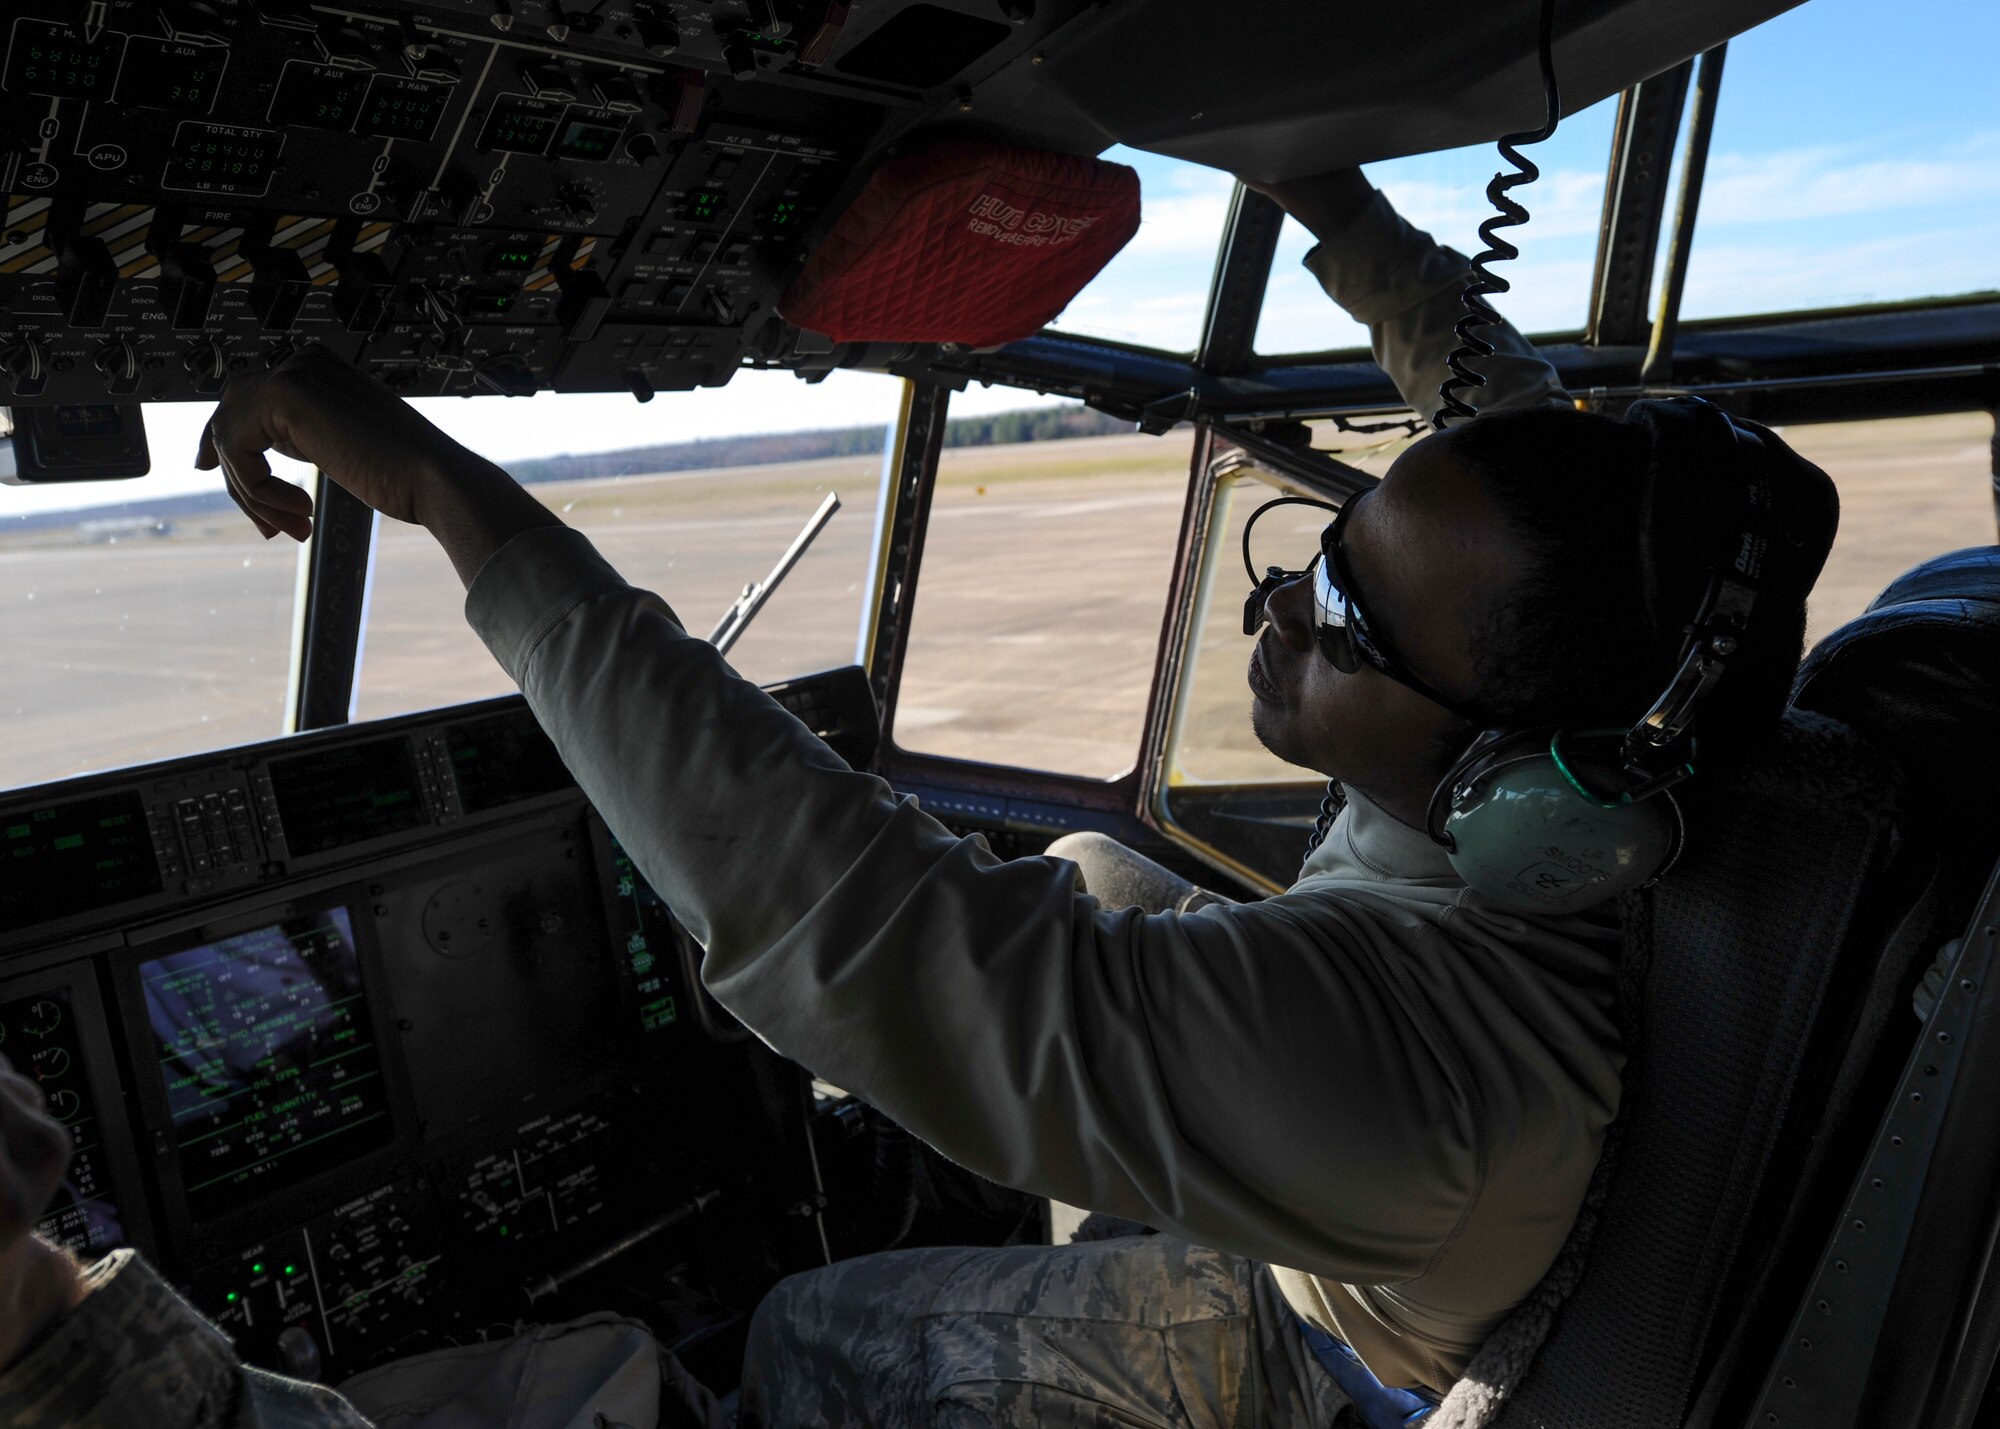 U.S. Air Force Senior Airman Zachariah Smoots, a 314th Aircraft Maintenance Squadron C-130J crew chief, performs a post flight inspection inside the flight deck of a C-130J March 2, 2016, at Little Rock Air Force Base, Ark. Crew chiefs ensure that the aircraft in their care are ready to fly at a moment’s notice so that pilots can safely and effectively complete their mission. (U.S. Air Force photo/Senior Airman Harry Brexel)